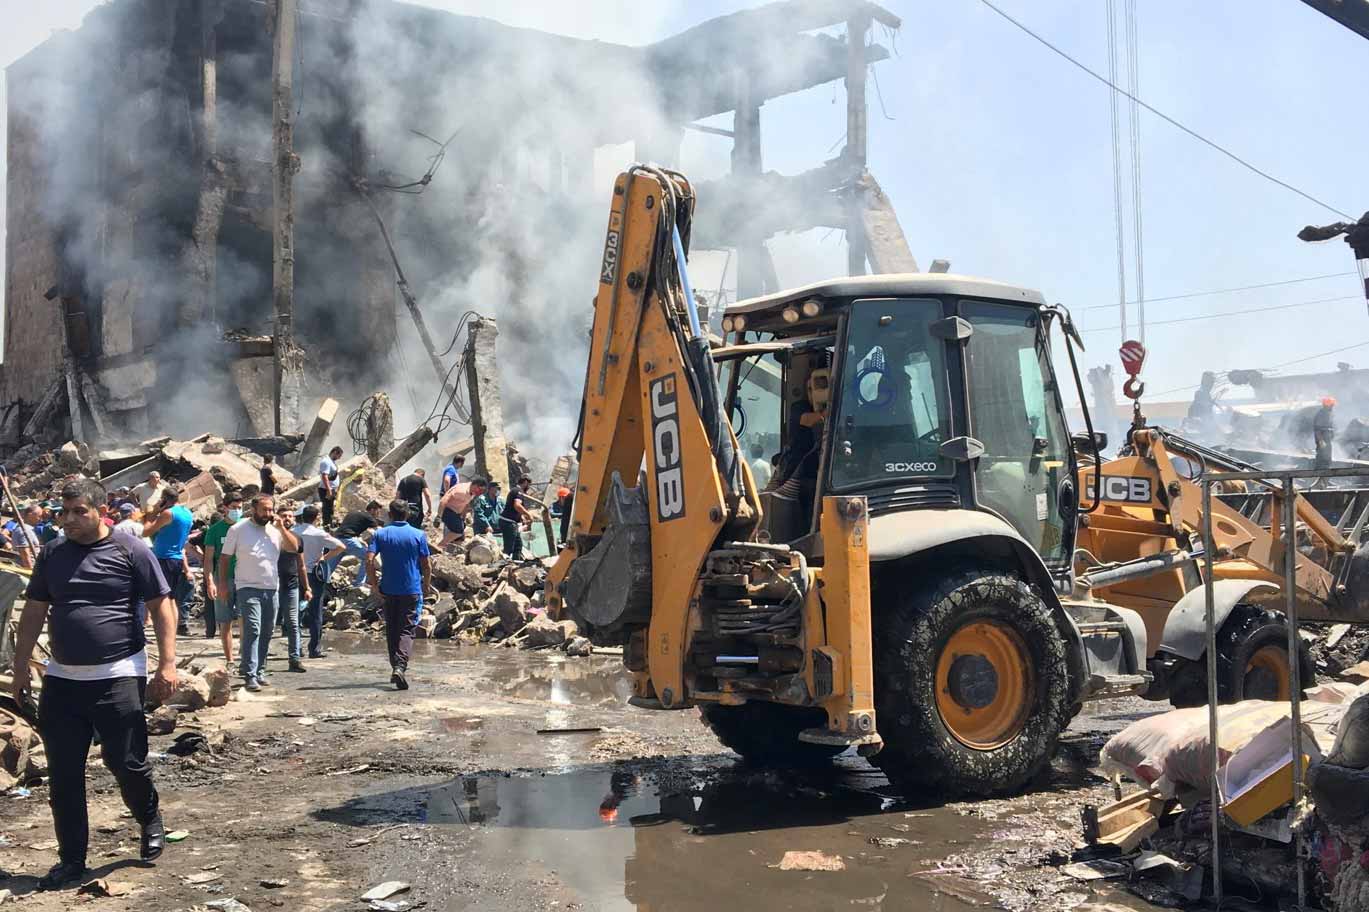 The explosion affected 36 businesses, but the government ruled out compensation, arguing that enterprises should have been insured. Authorities are compensating the victims of the explosion. © Armine Avetisyan